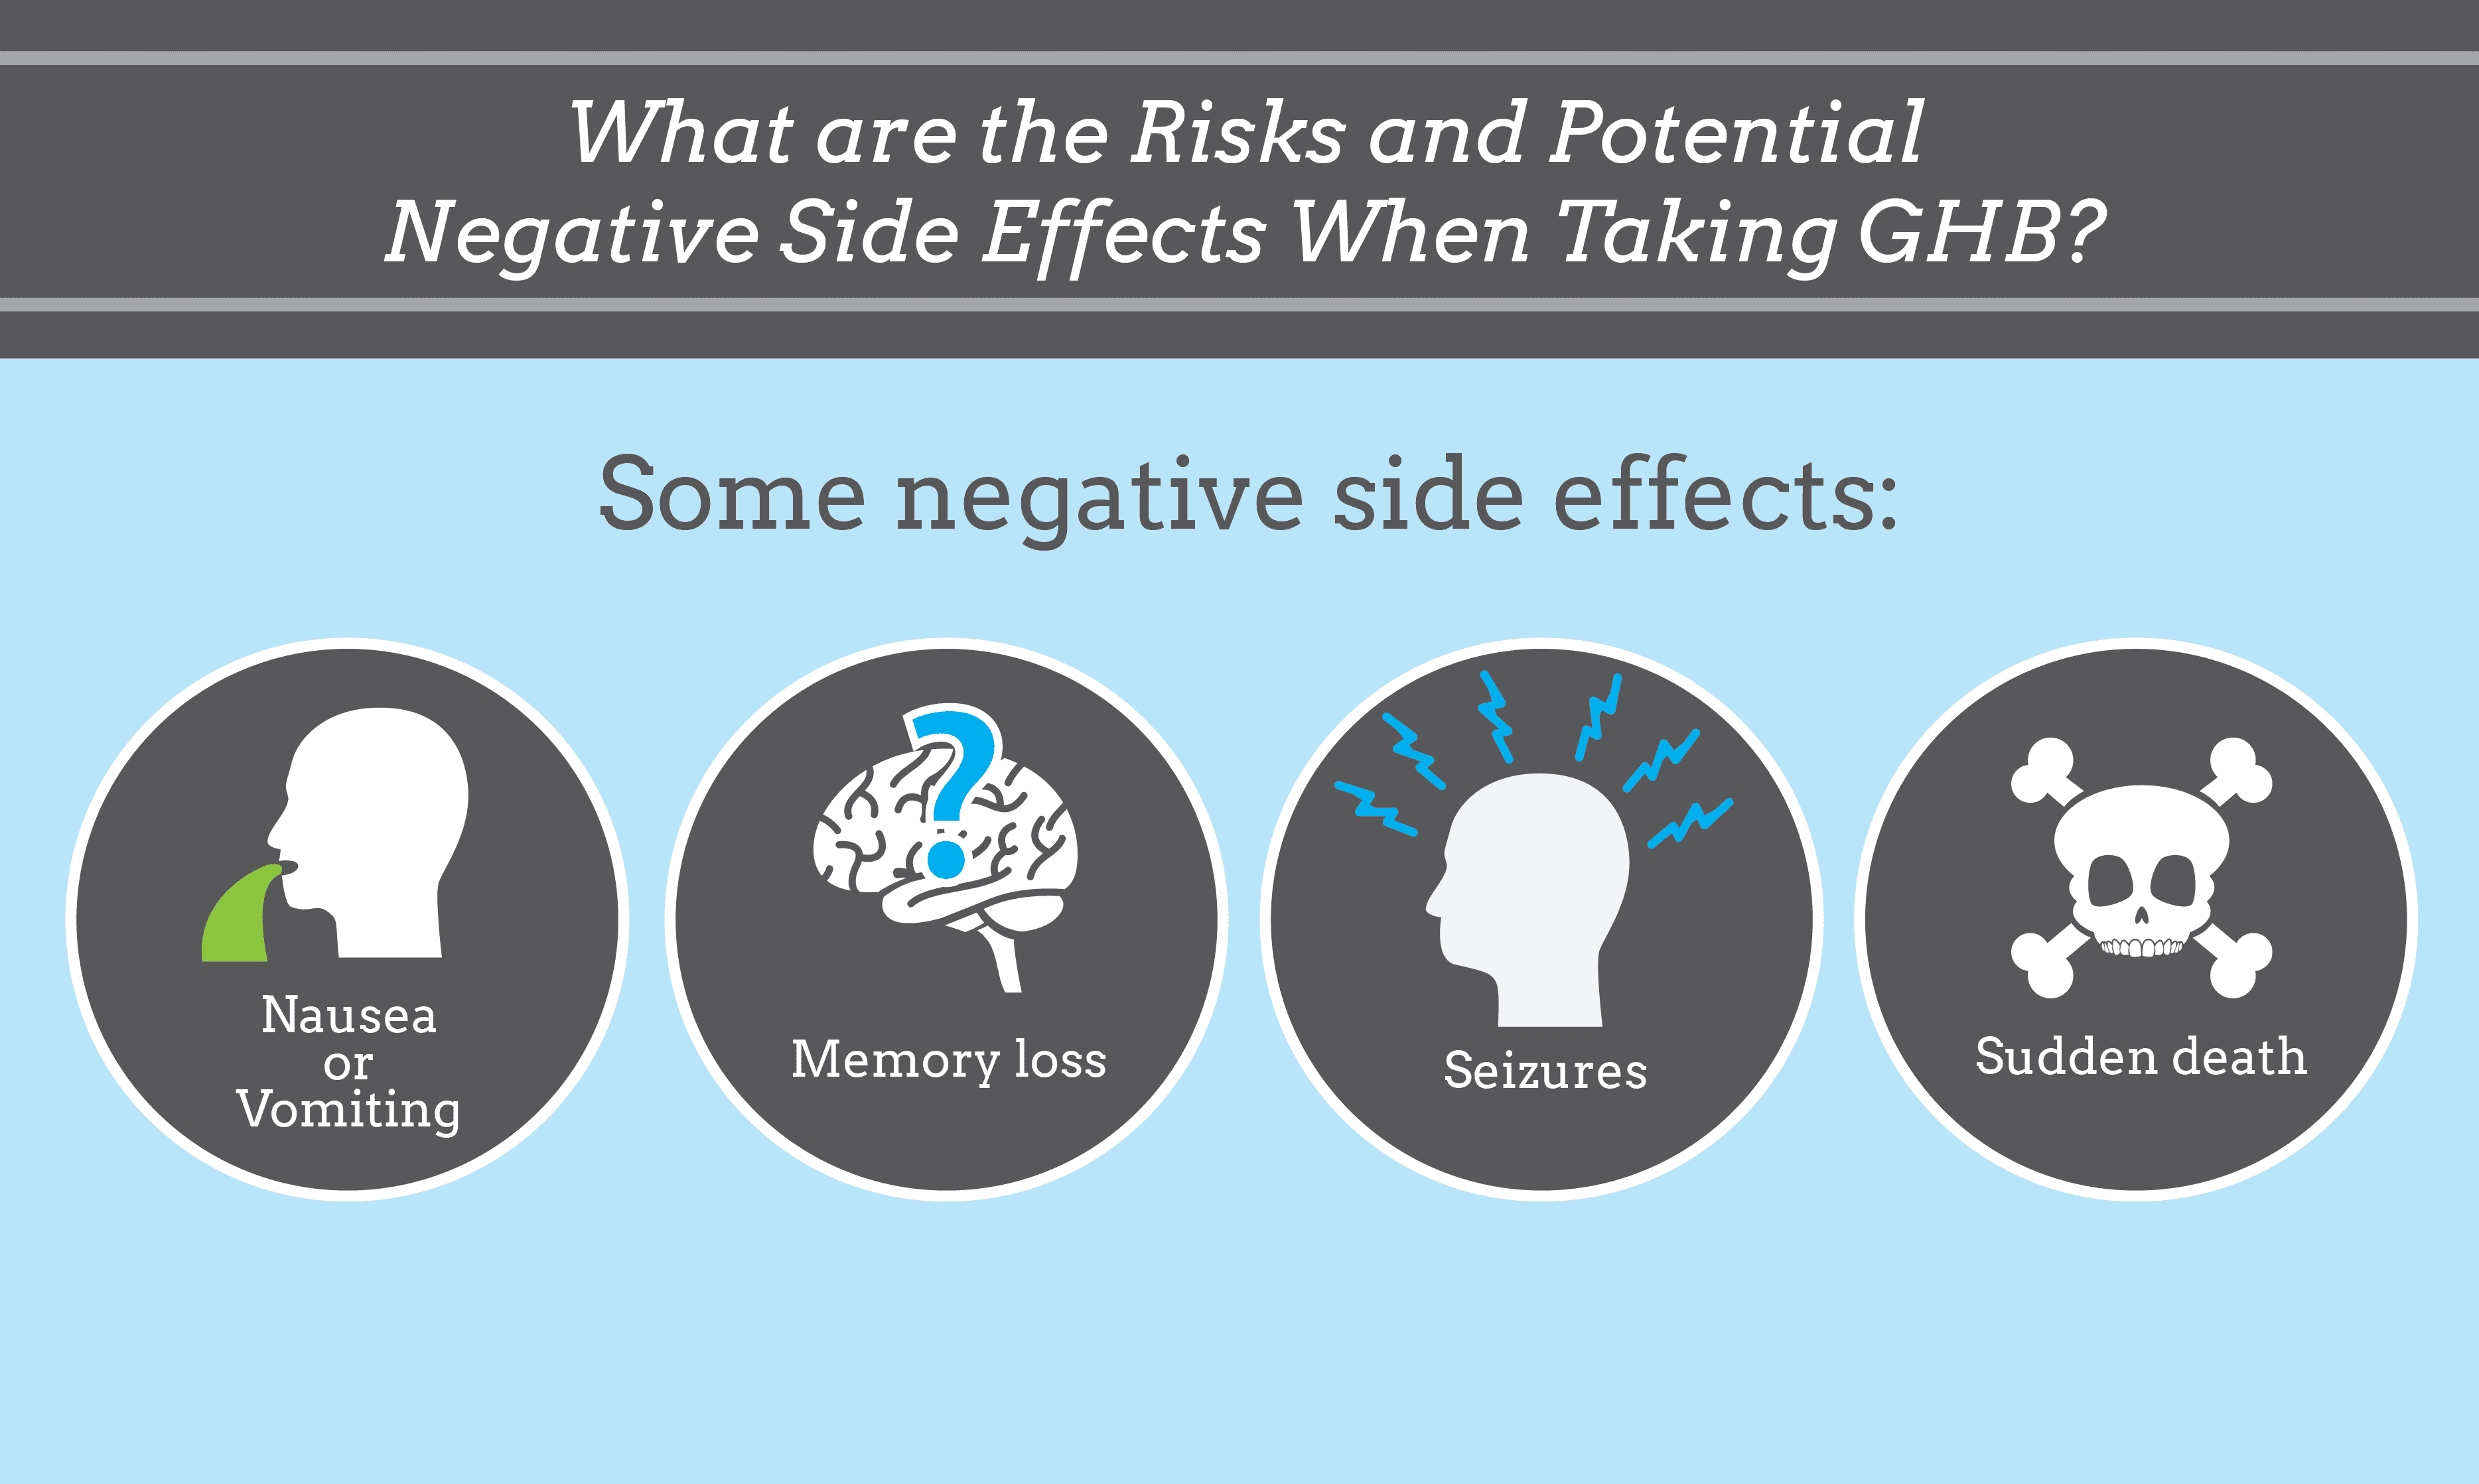 What are the Risks and Potential Negative Side Effects When Taking GHB?